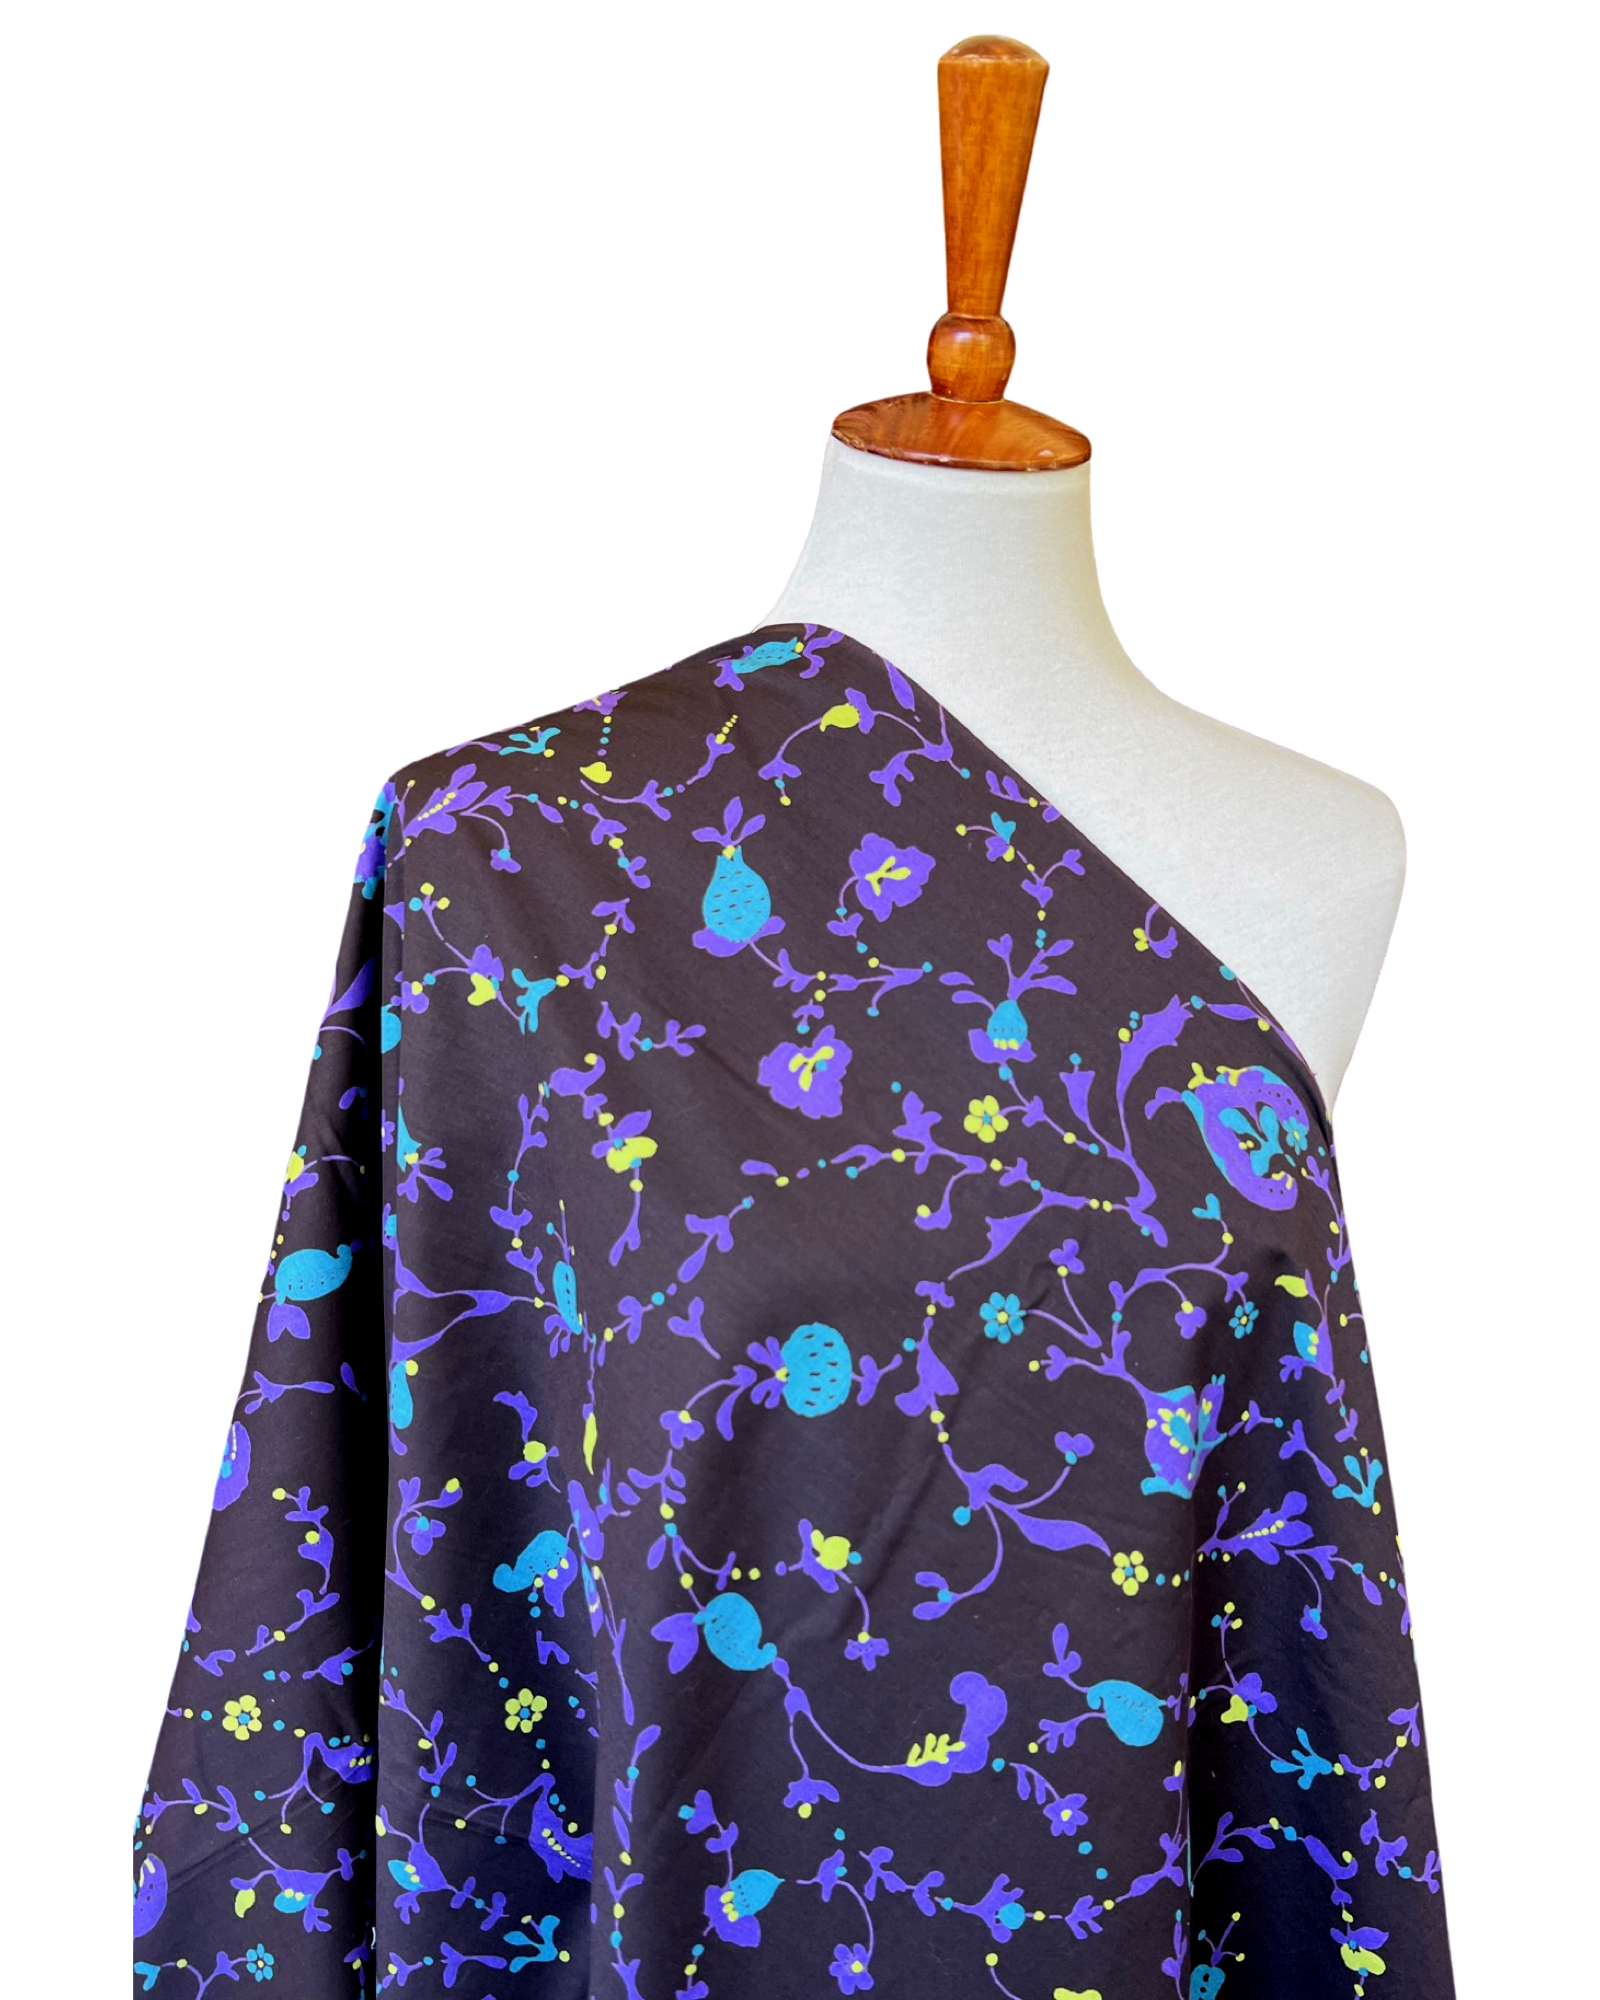 Early 1960s Stylized Floral Cotton